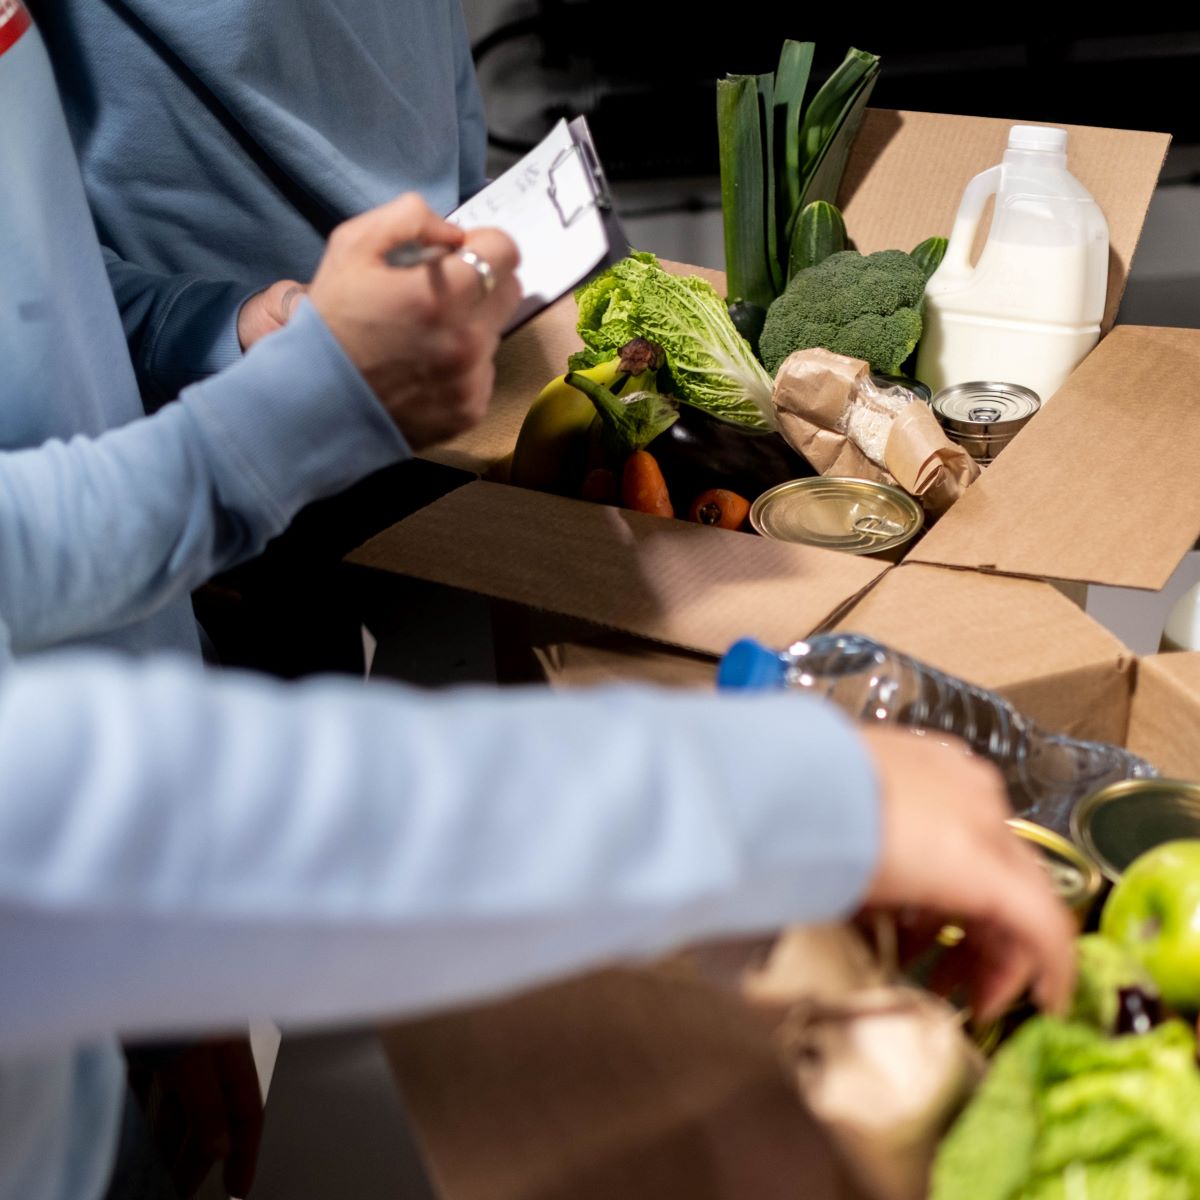 Opinion: Food banks in your area – are you really sitting comfortably?